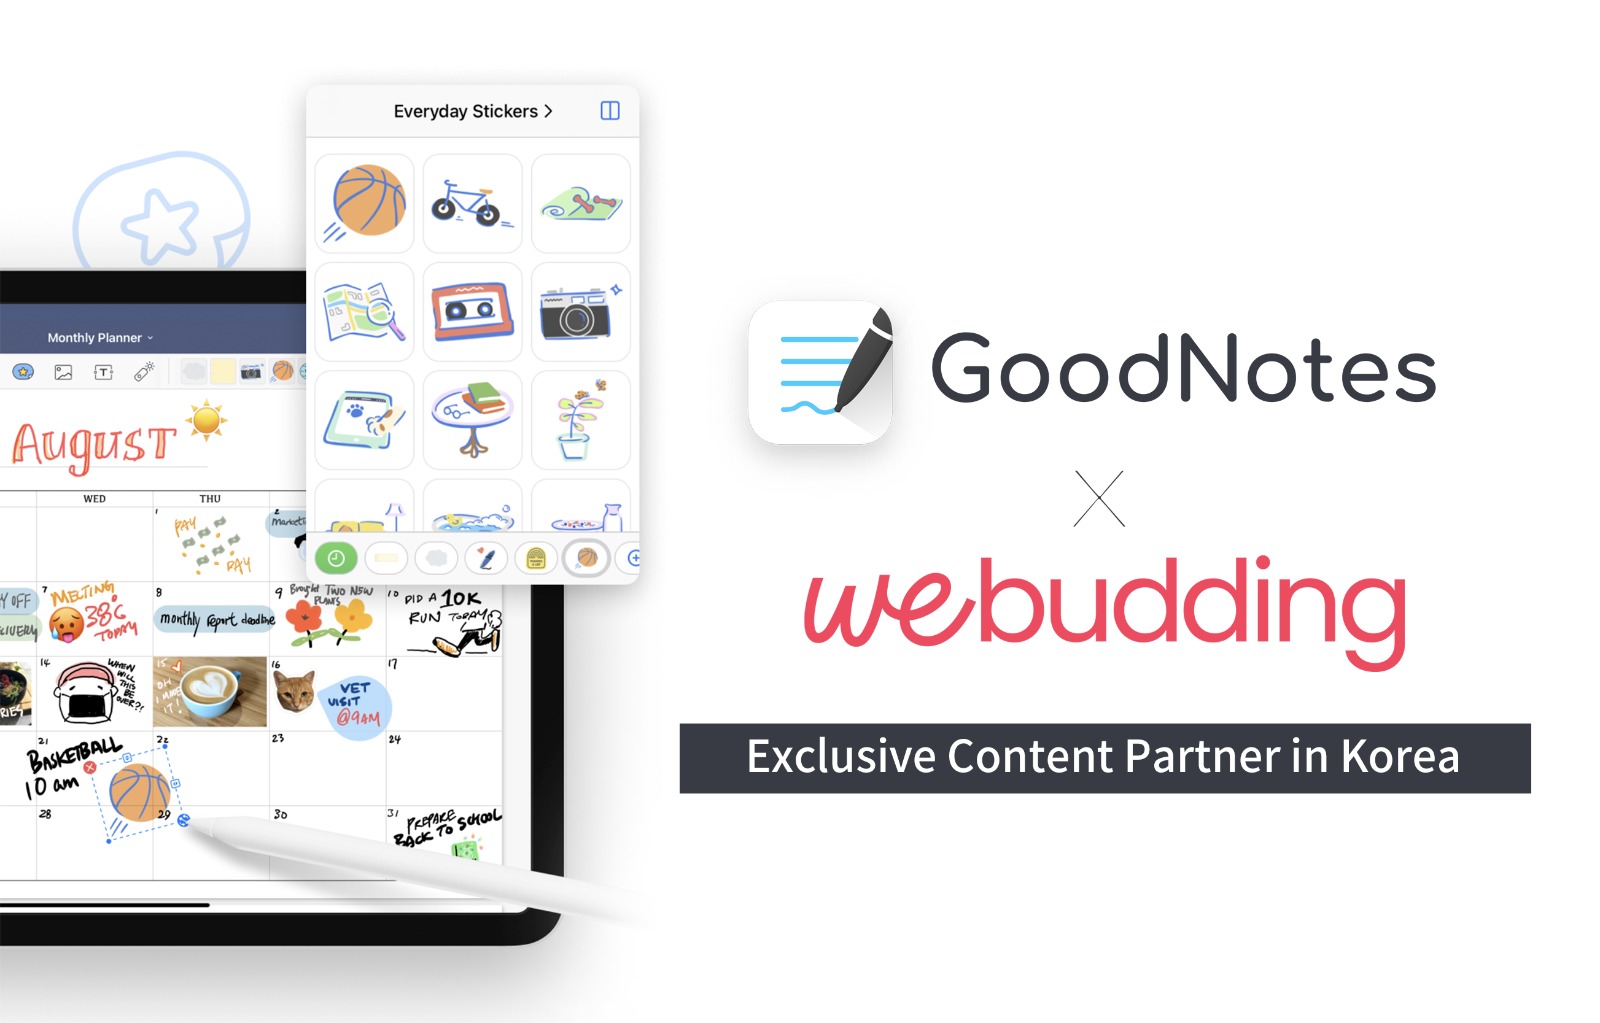 Korean startup WeBudding partners exclusively with the most popular free app Goodnotes 5 to provide Korean digital stationery content to users globally